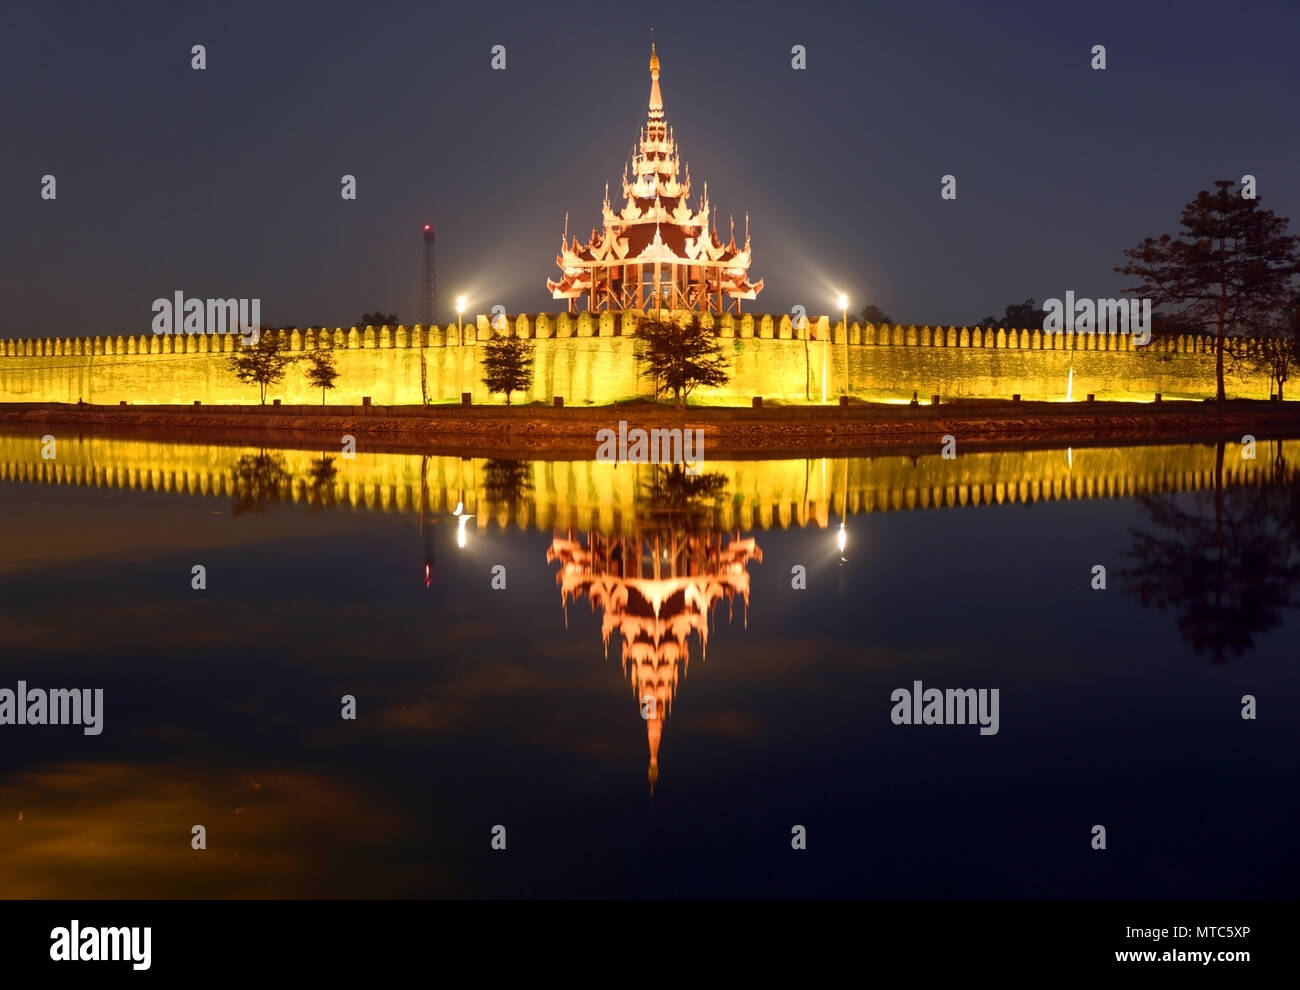 Fort oder Royal Palace in Mandalay bei Nacht Stockfoto